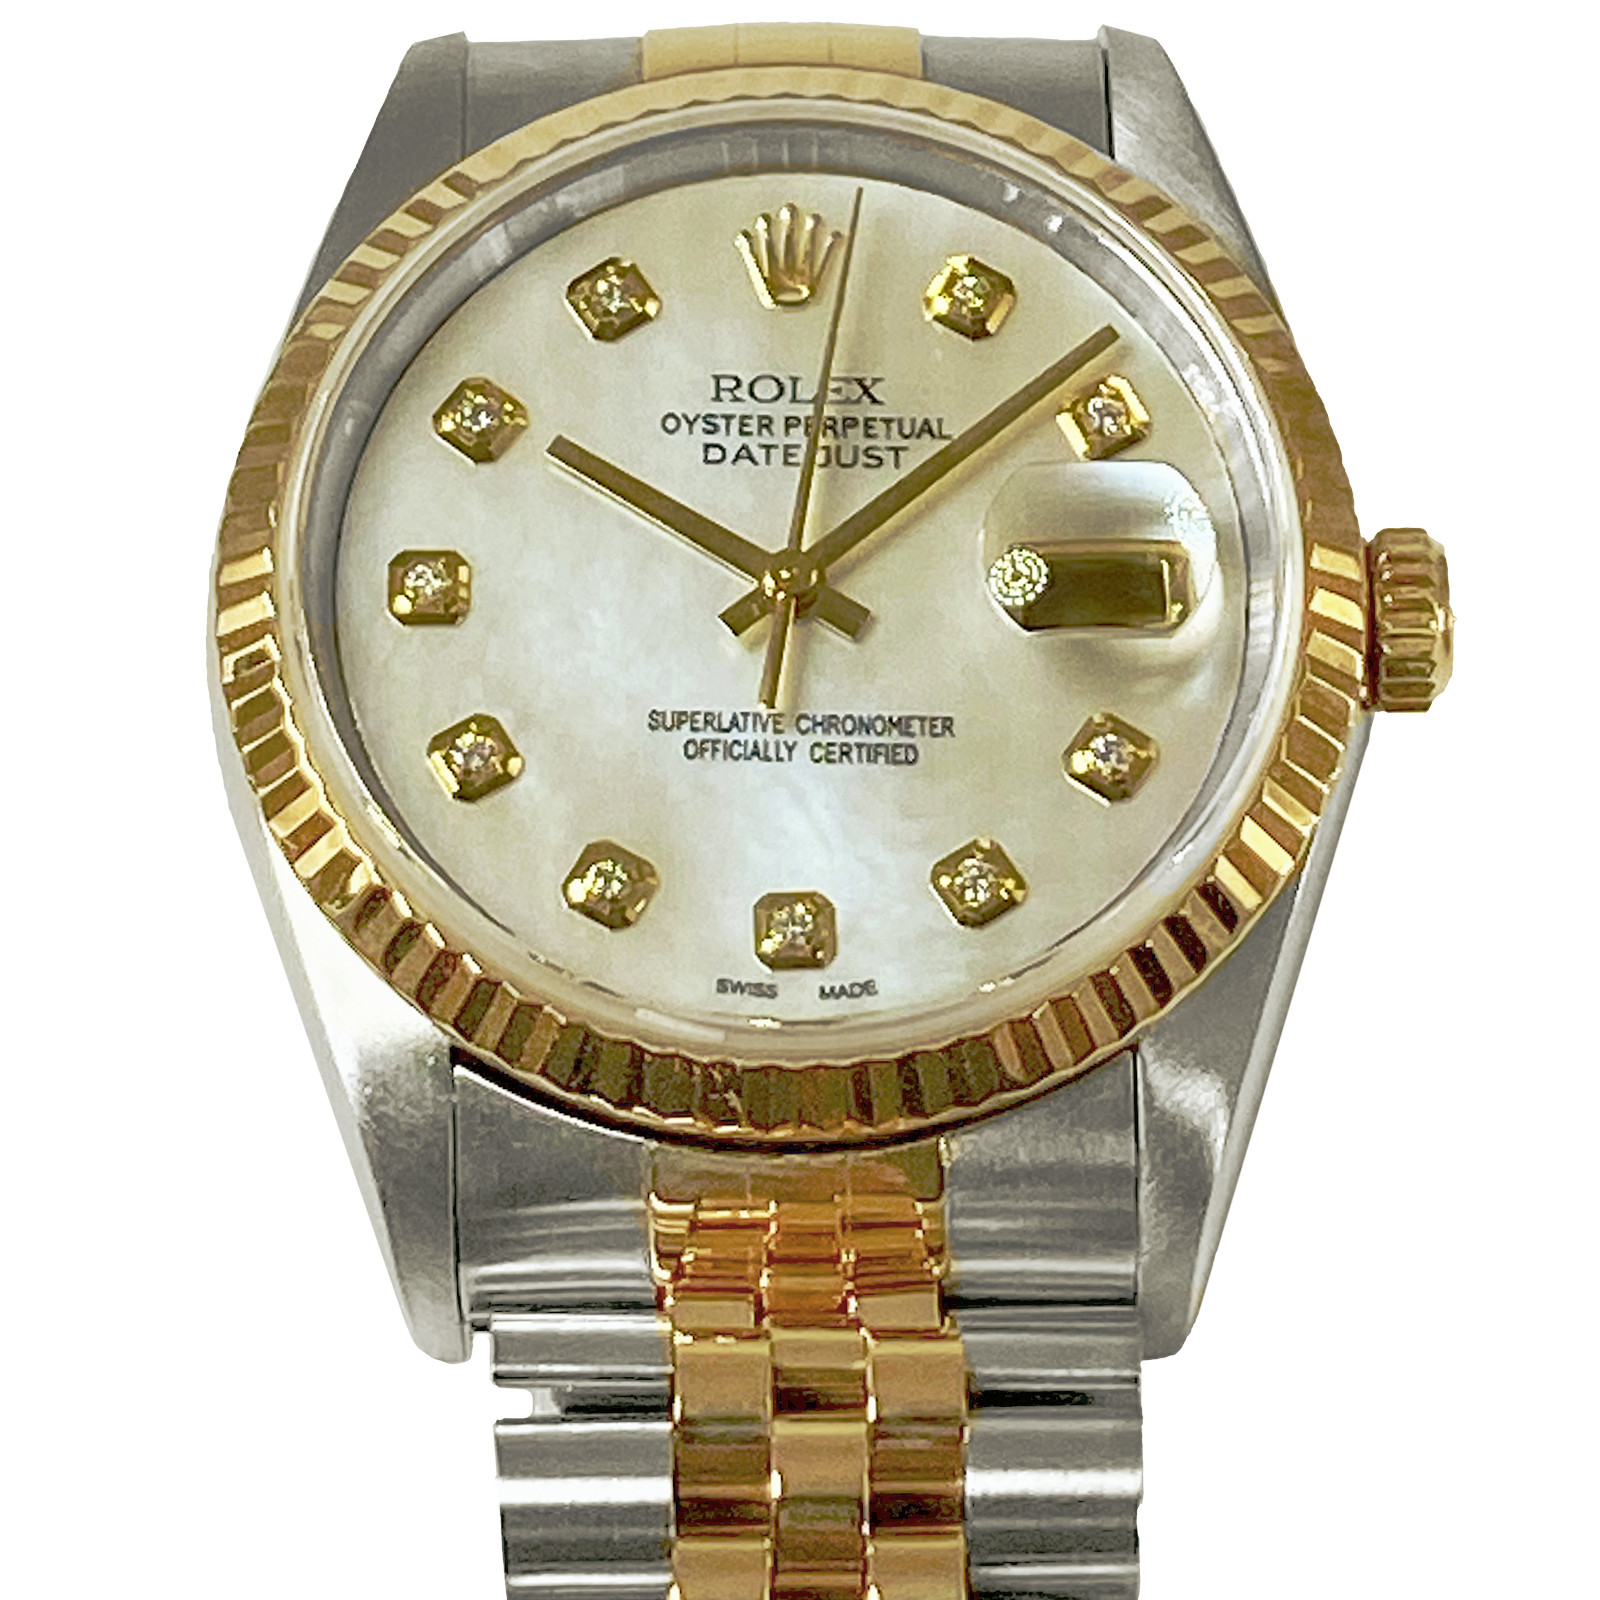 Rolex 16233 Mother Of Pearl Diamond Dial